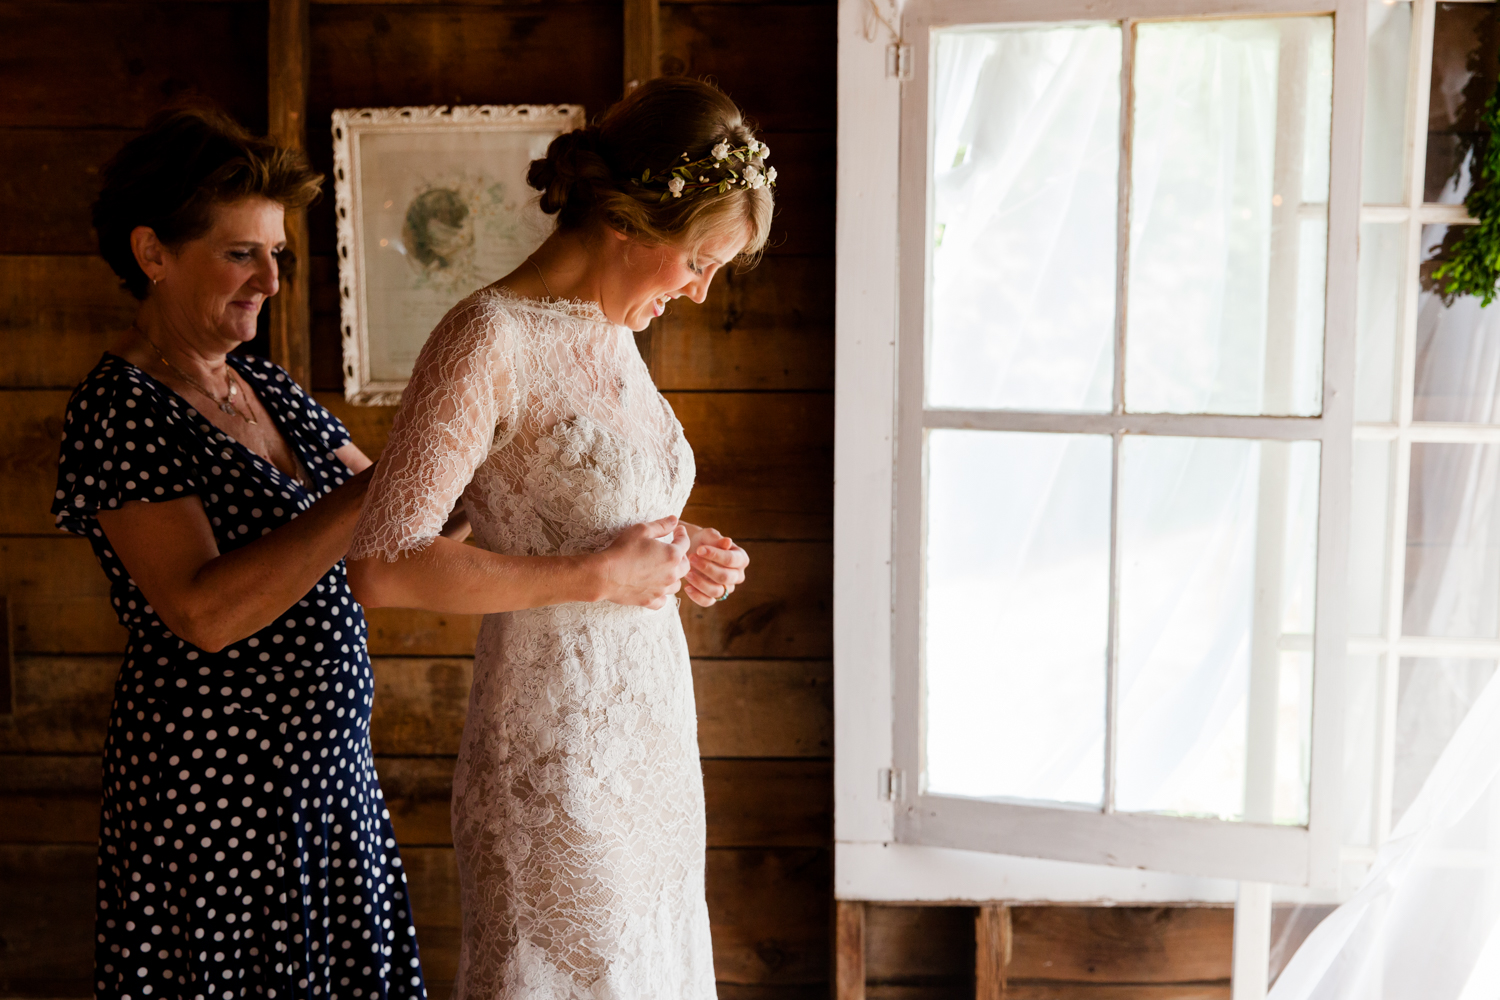  A mother helps the bride with her dress 